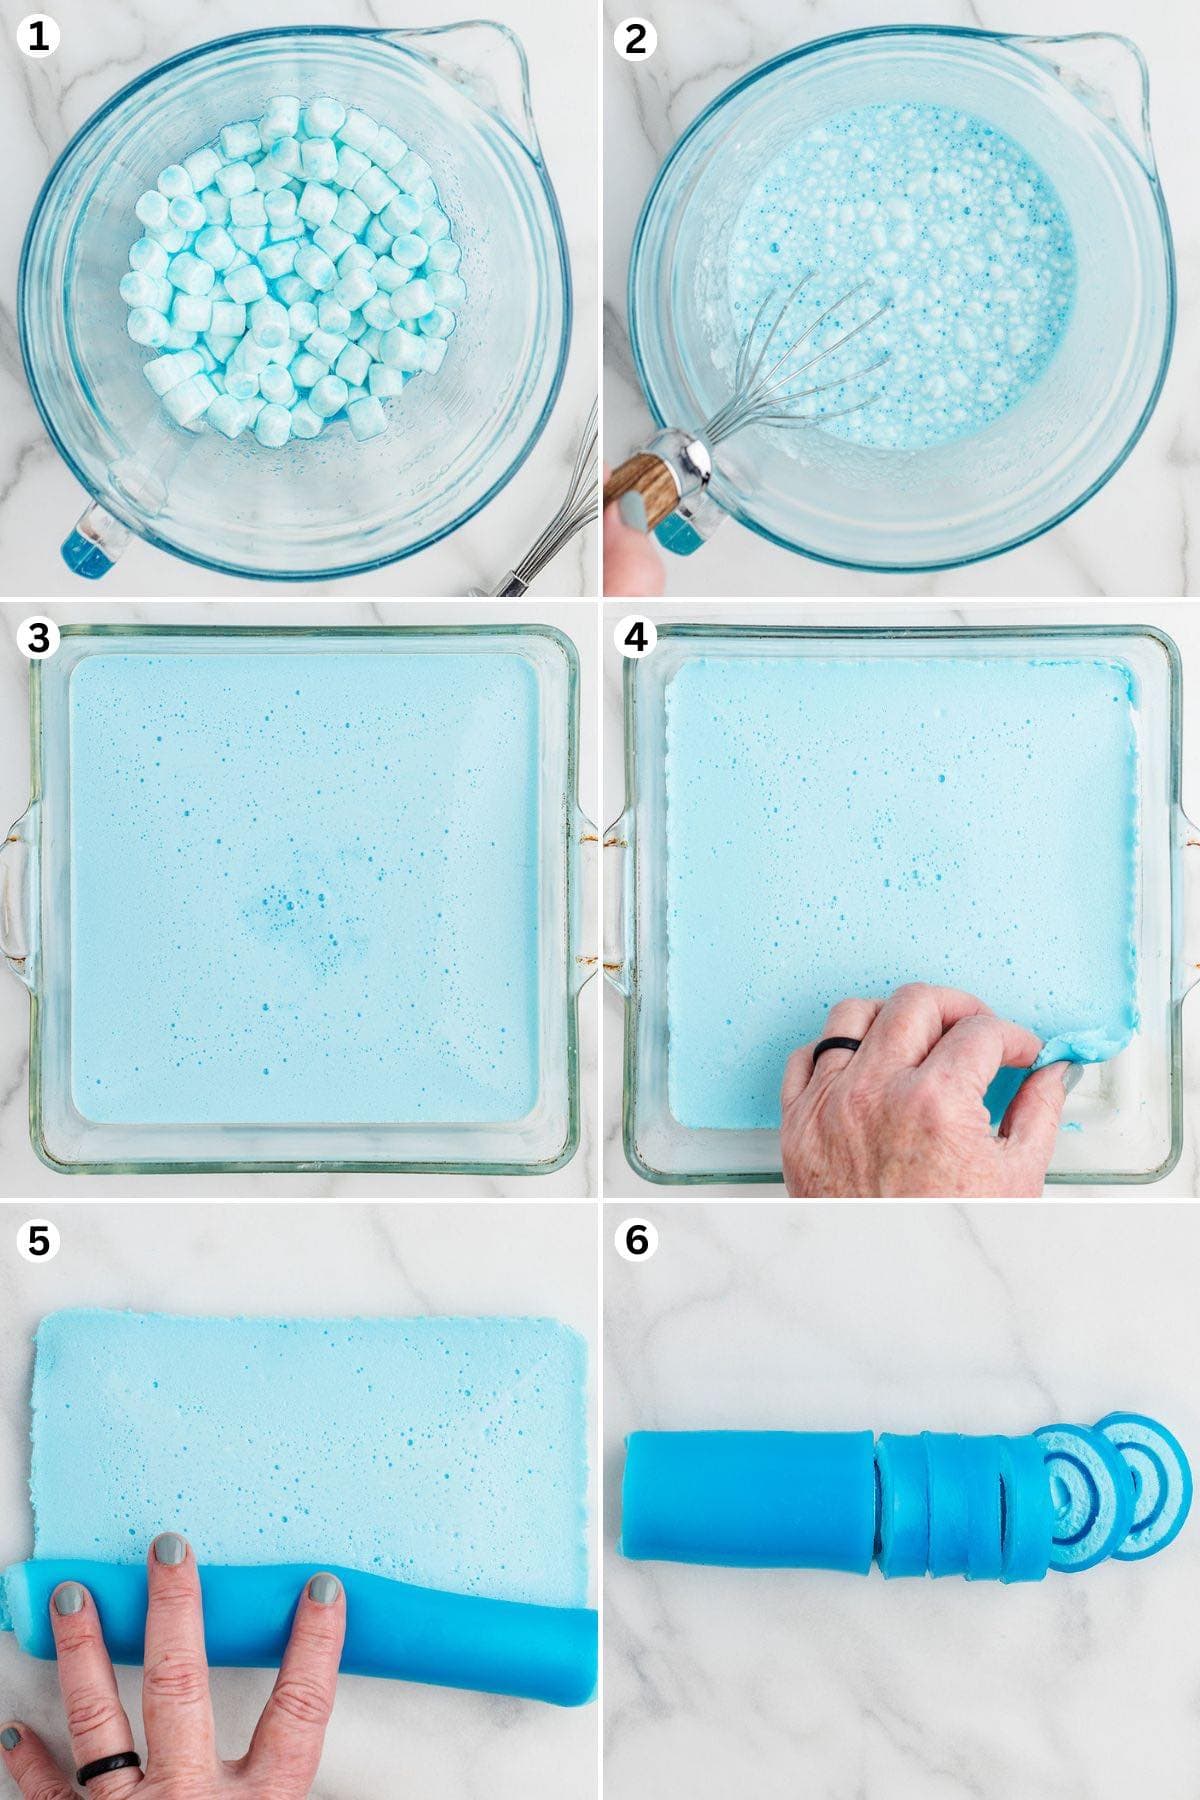 Melt the gelatin and marshmallows. Pour the mixture into the pan and let it set. Pull up one corner and pull to lift the sheet of jello out of the pan. Roll into a log and slice into 12 slices.